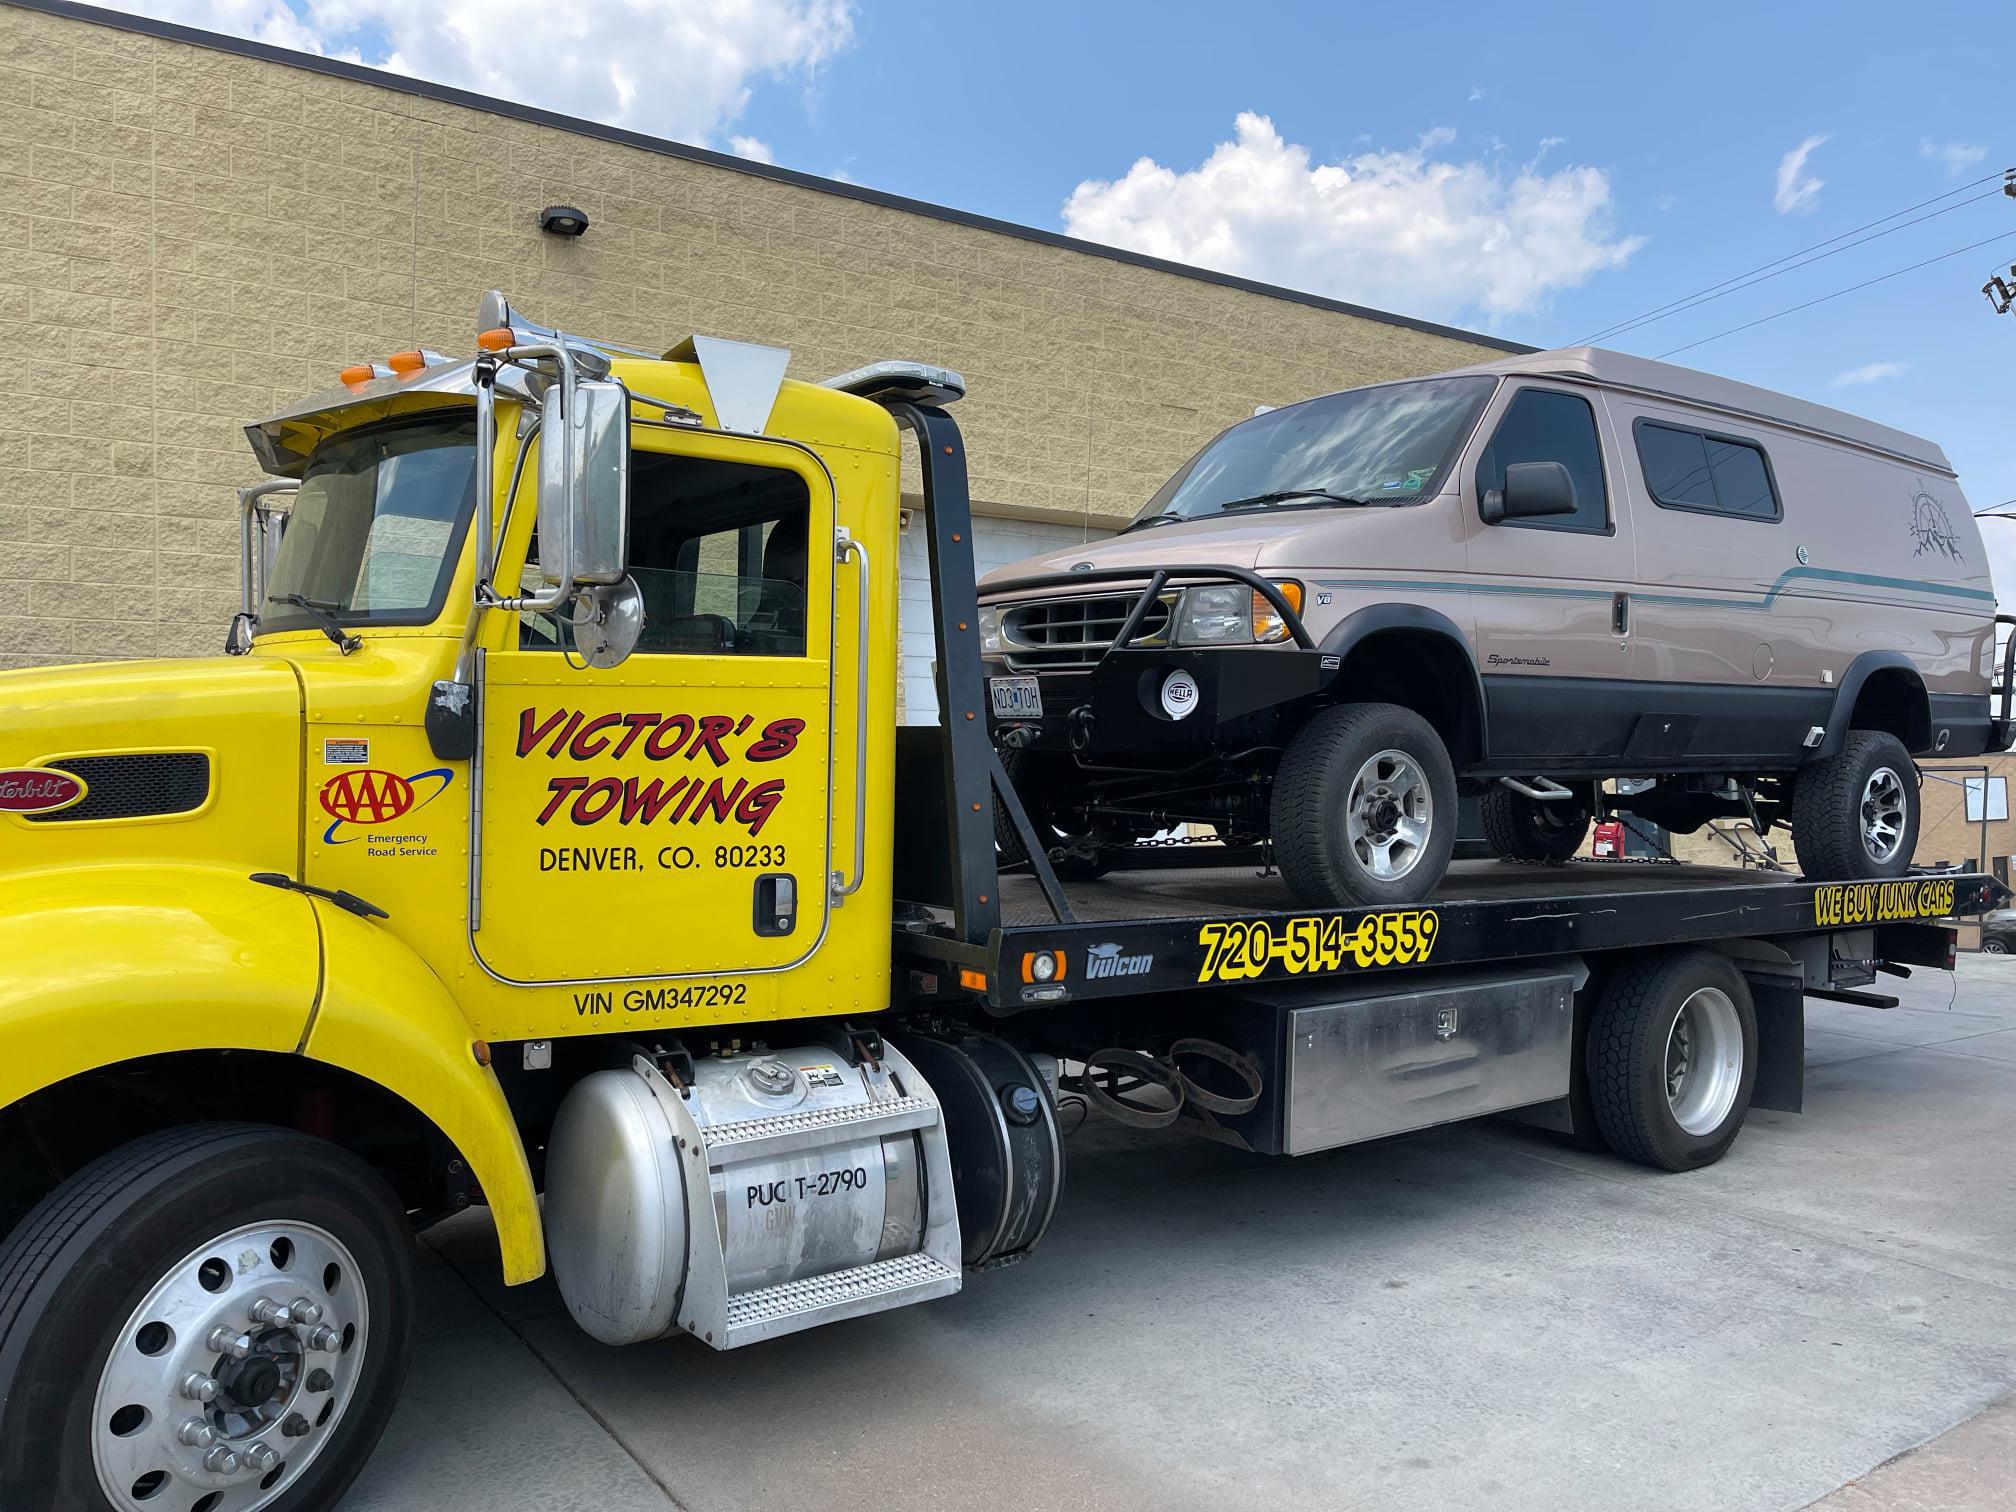 Victor's Towing II doesn't care what condition your car is in. Whatever the damage, no car is too bad for us to buy. Call us at 720-514-3559 for a guaranteed free quote for your car in Denver. We will be there to tow the car at our cost and still pay you the full price of your car!